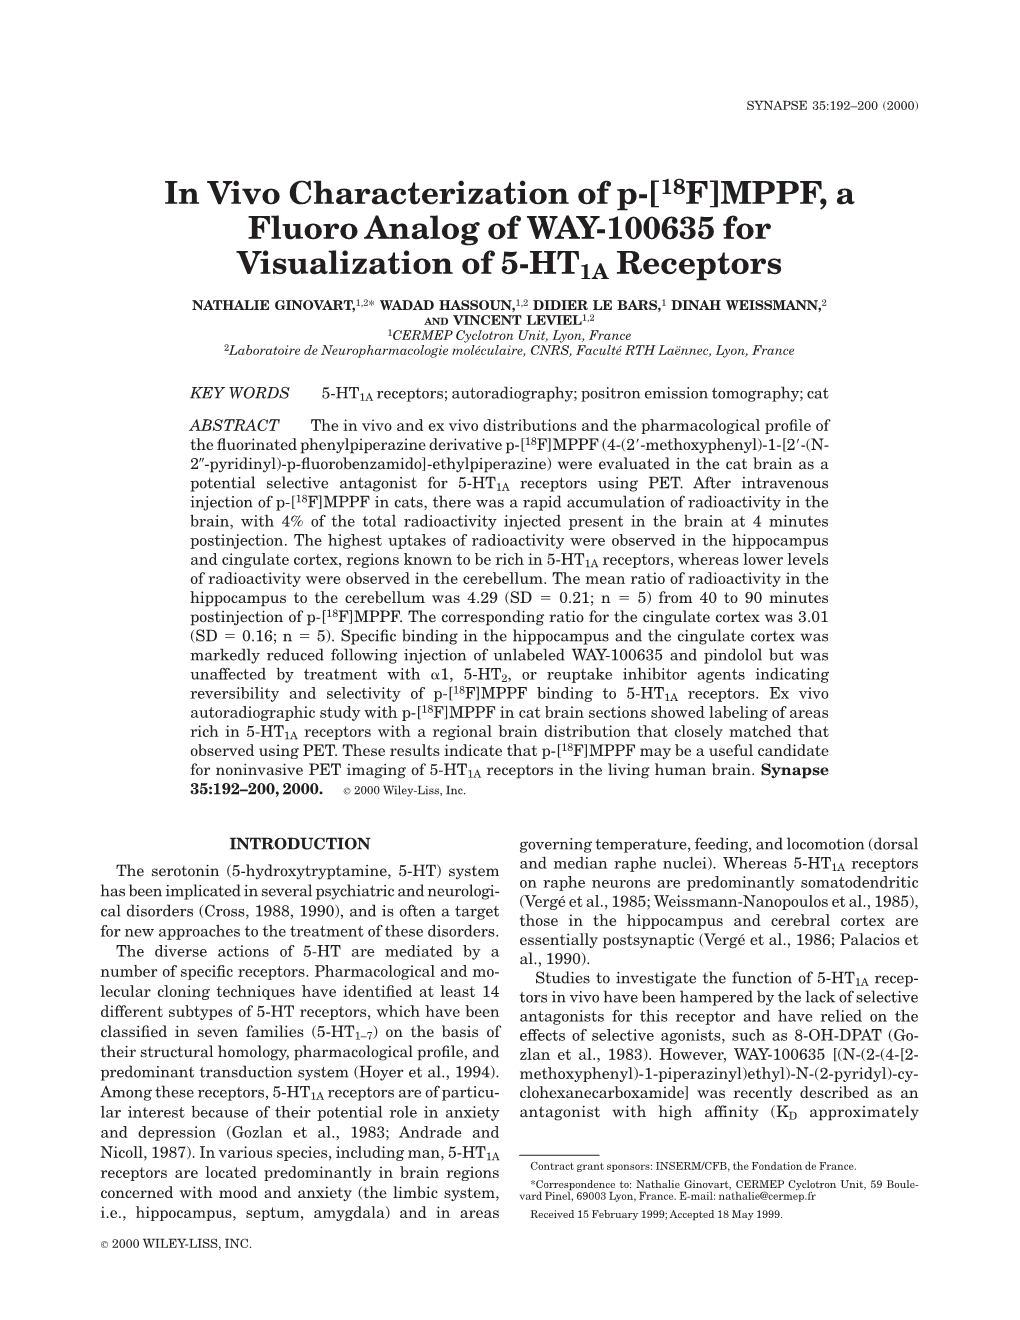 [18F]MPPF, a Fluoro Analog of WAY-100635 for Visualization of 5-HT1A Receptors